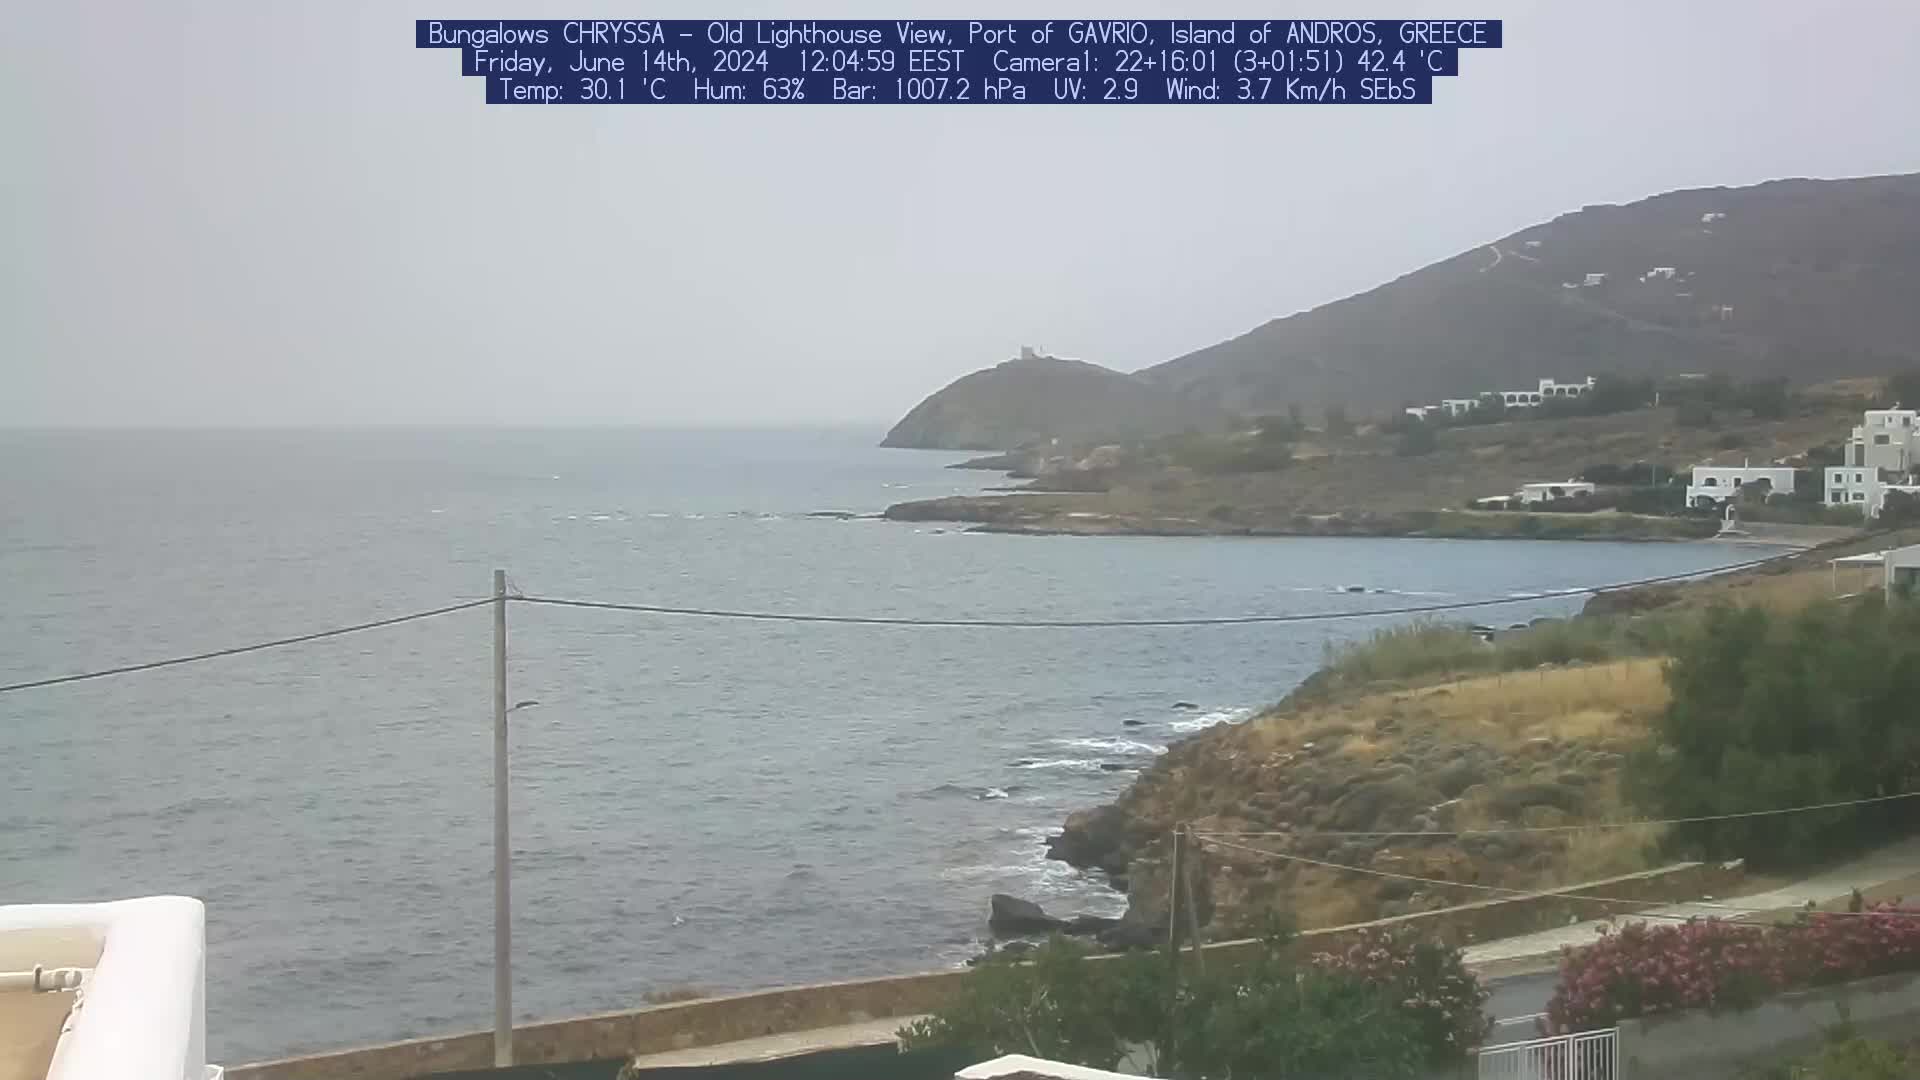 Andros - Gavrion Mar. 12:05